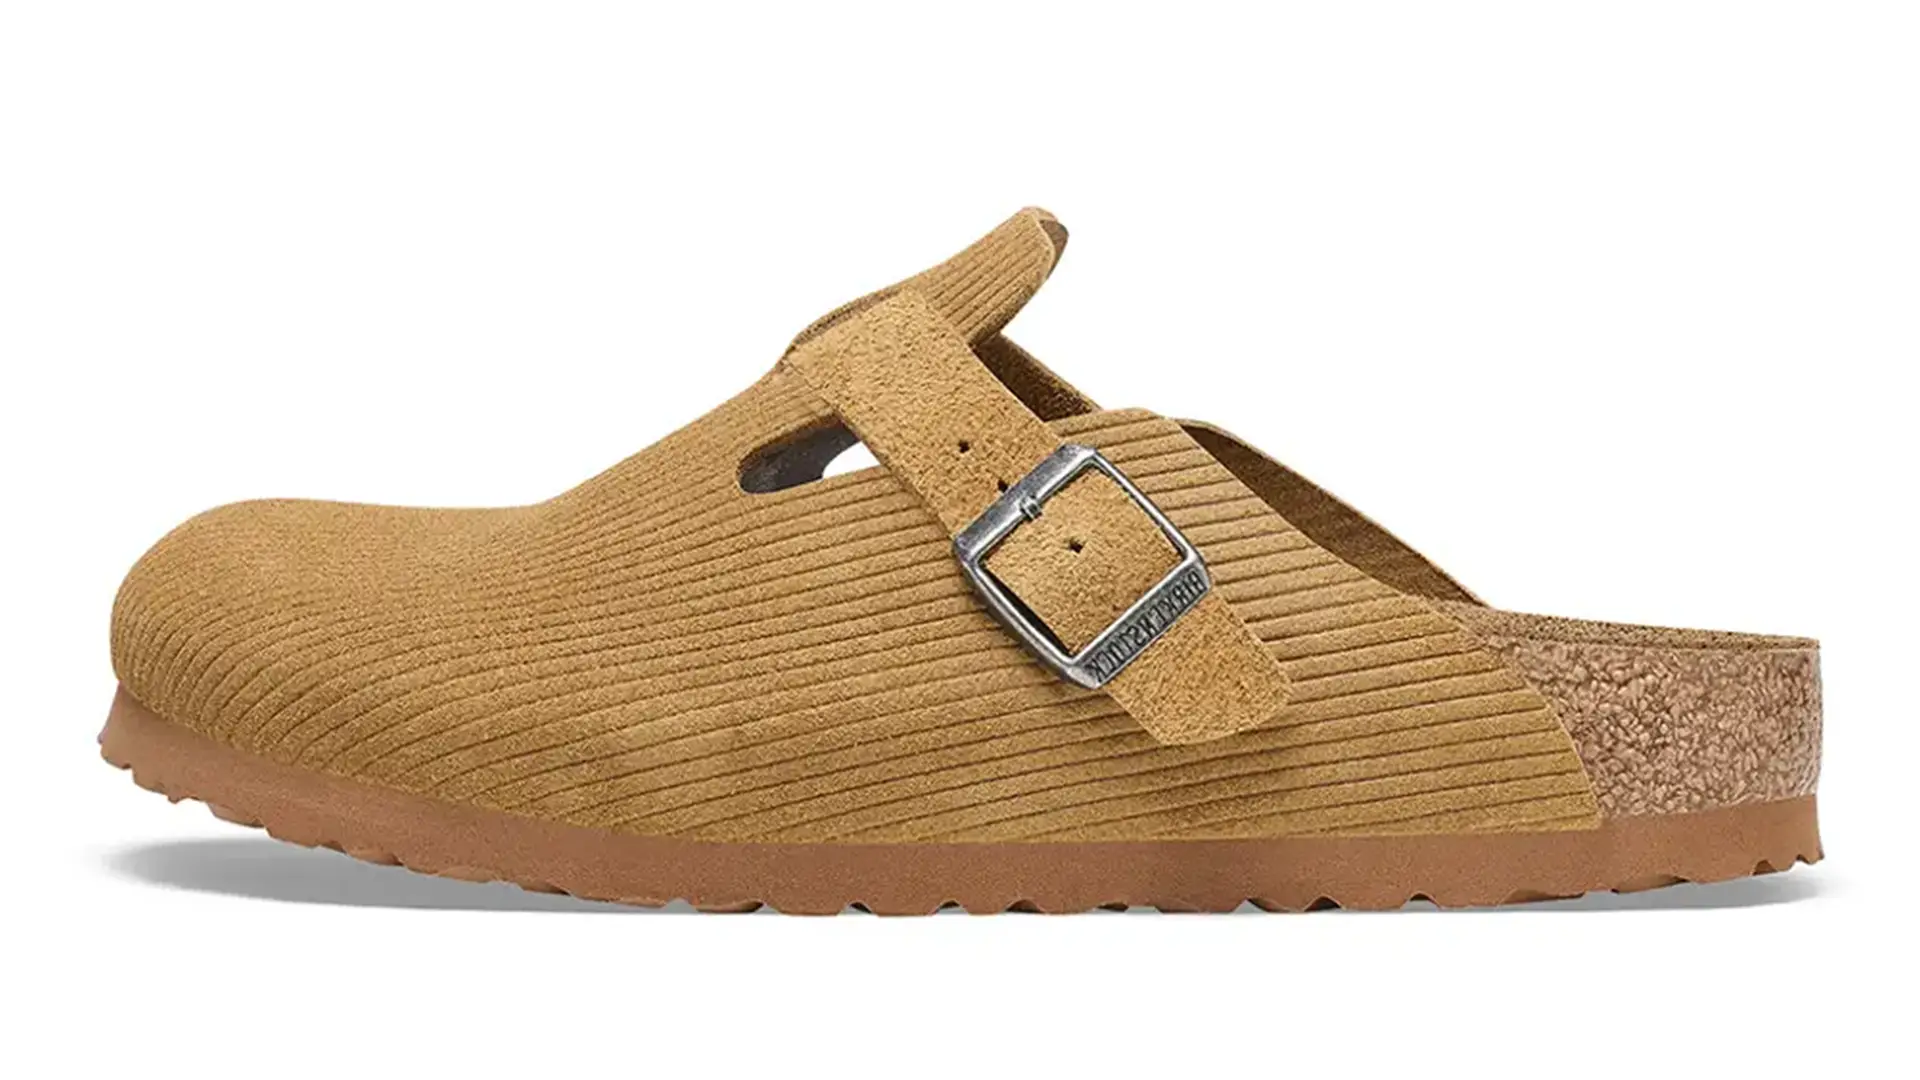 Stüssy is Serving Up Another Birkenstock Collab | The Sole Supplier